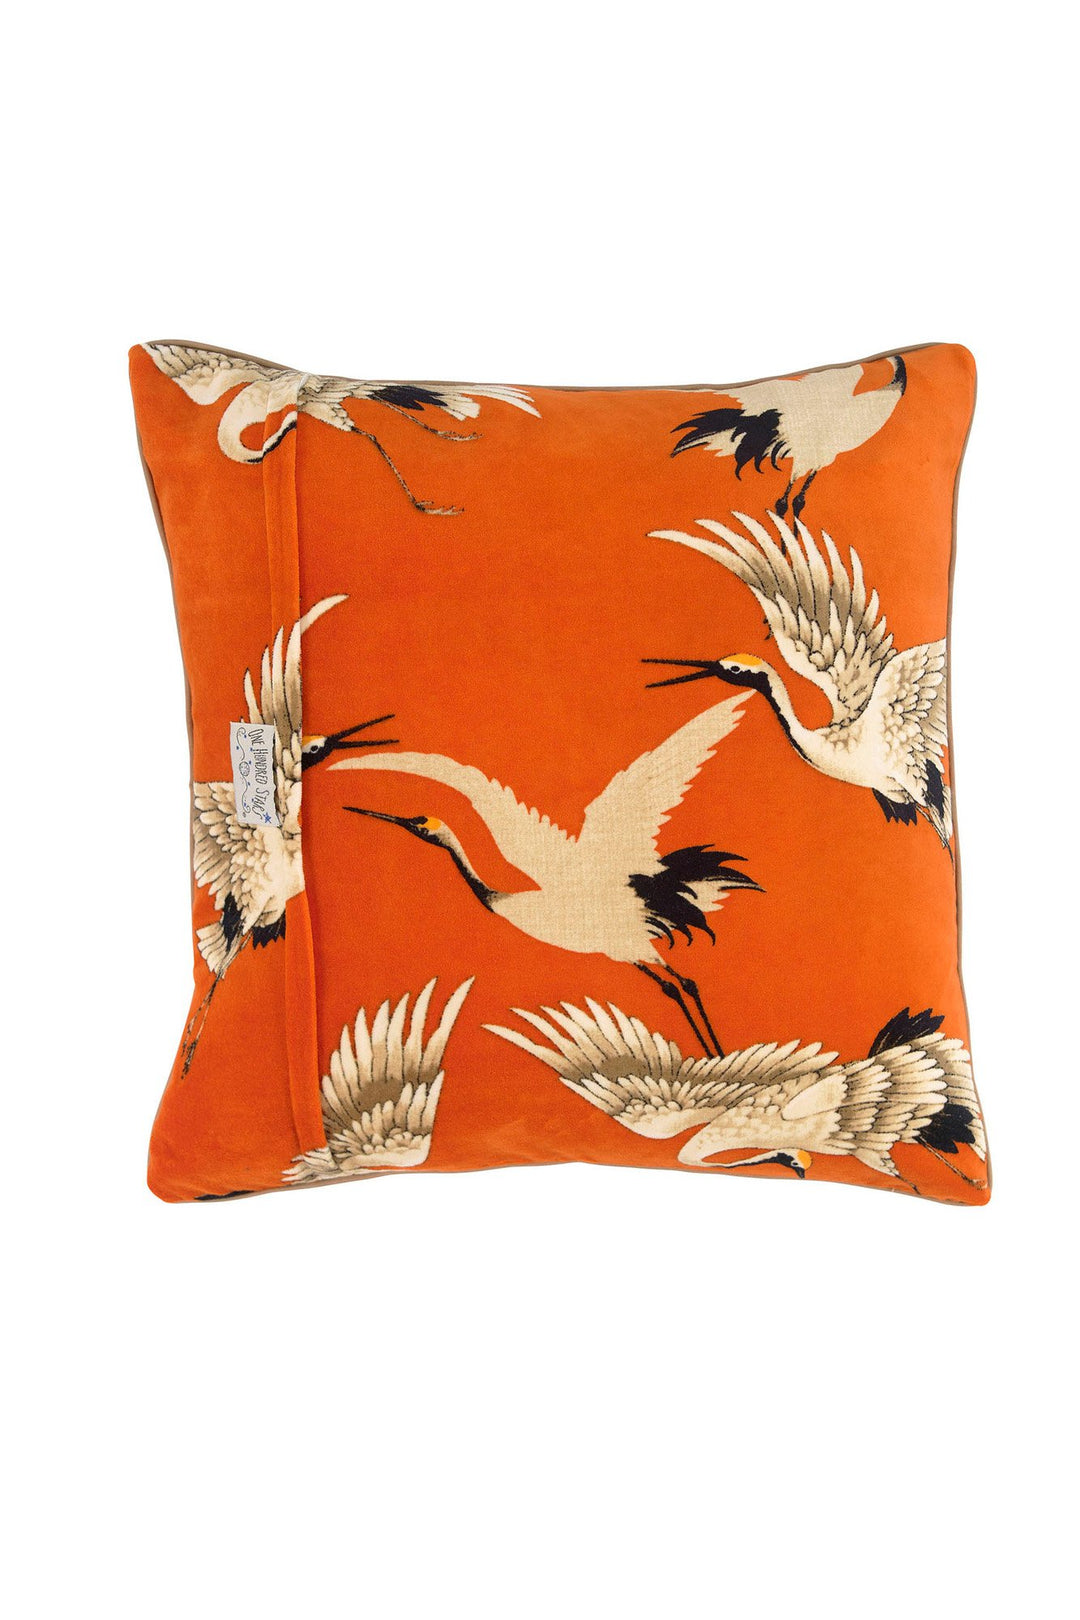 One Hundred stars Stork Crane Orange Square Velvet Cushion - Storks and cranes have been a major art deco trend in both fashion and interiors and this Stork Orange Square Velvet Cushion is perfect for anyone looking for something chic, stylish and in vogue!